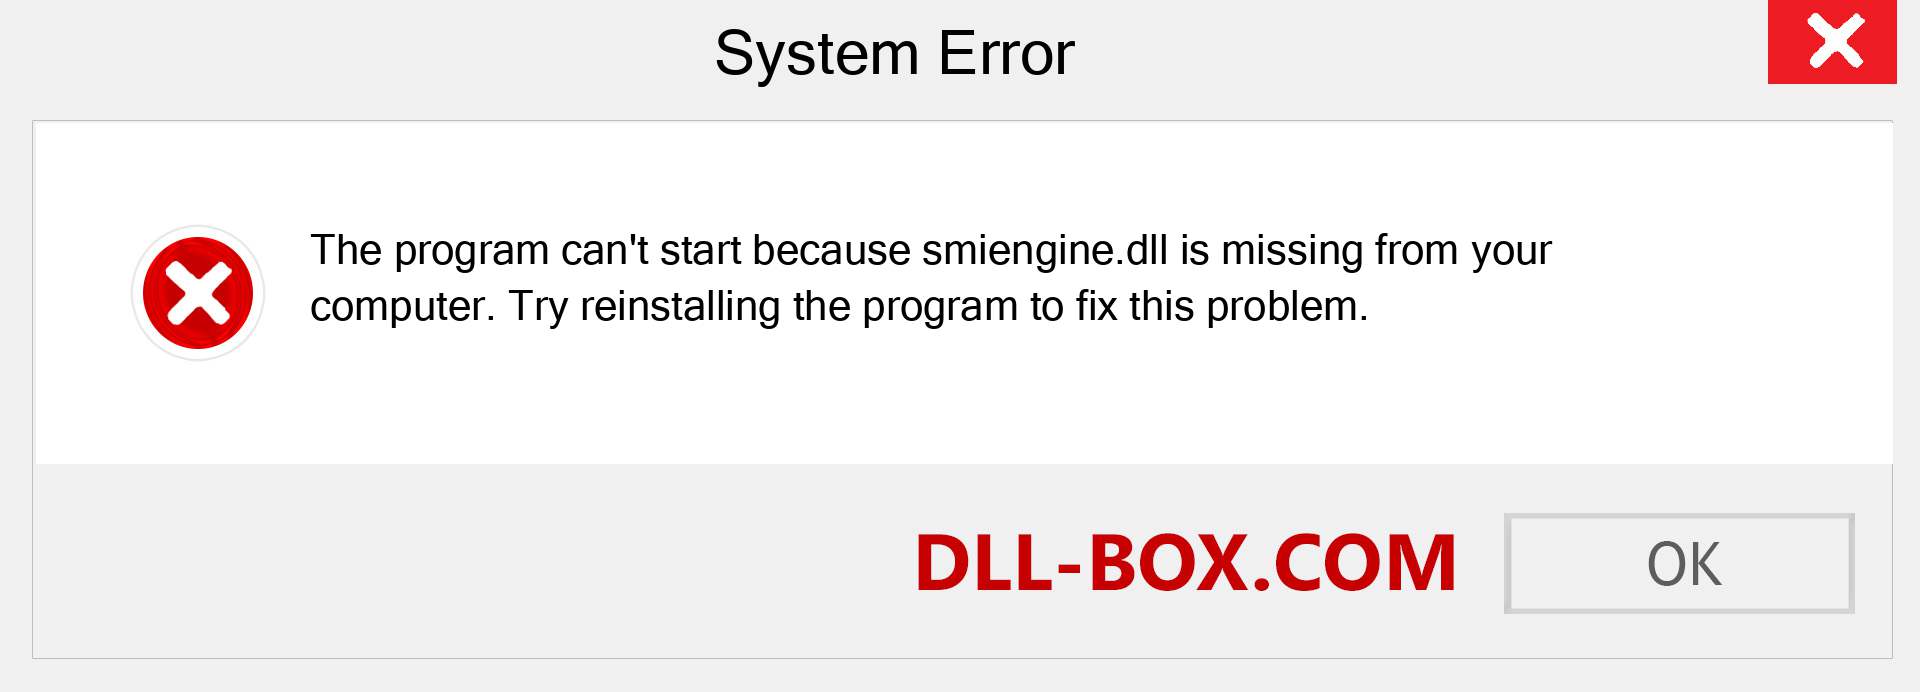  smiengine.dll file is missing?. Download for Windows 7, 8, 10 - Fix  smiengine dll Missing Error on Windows, photos, images